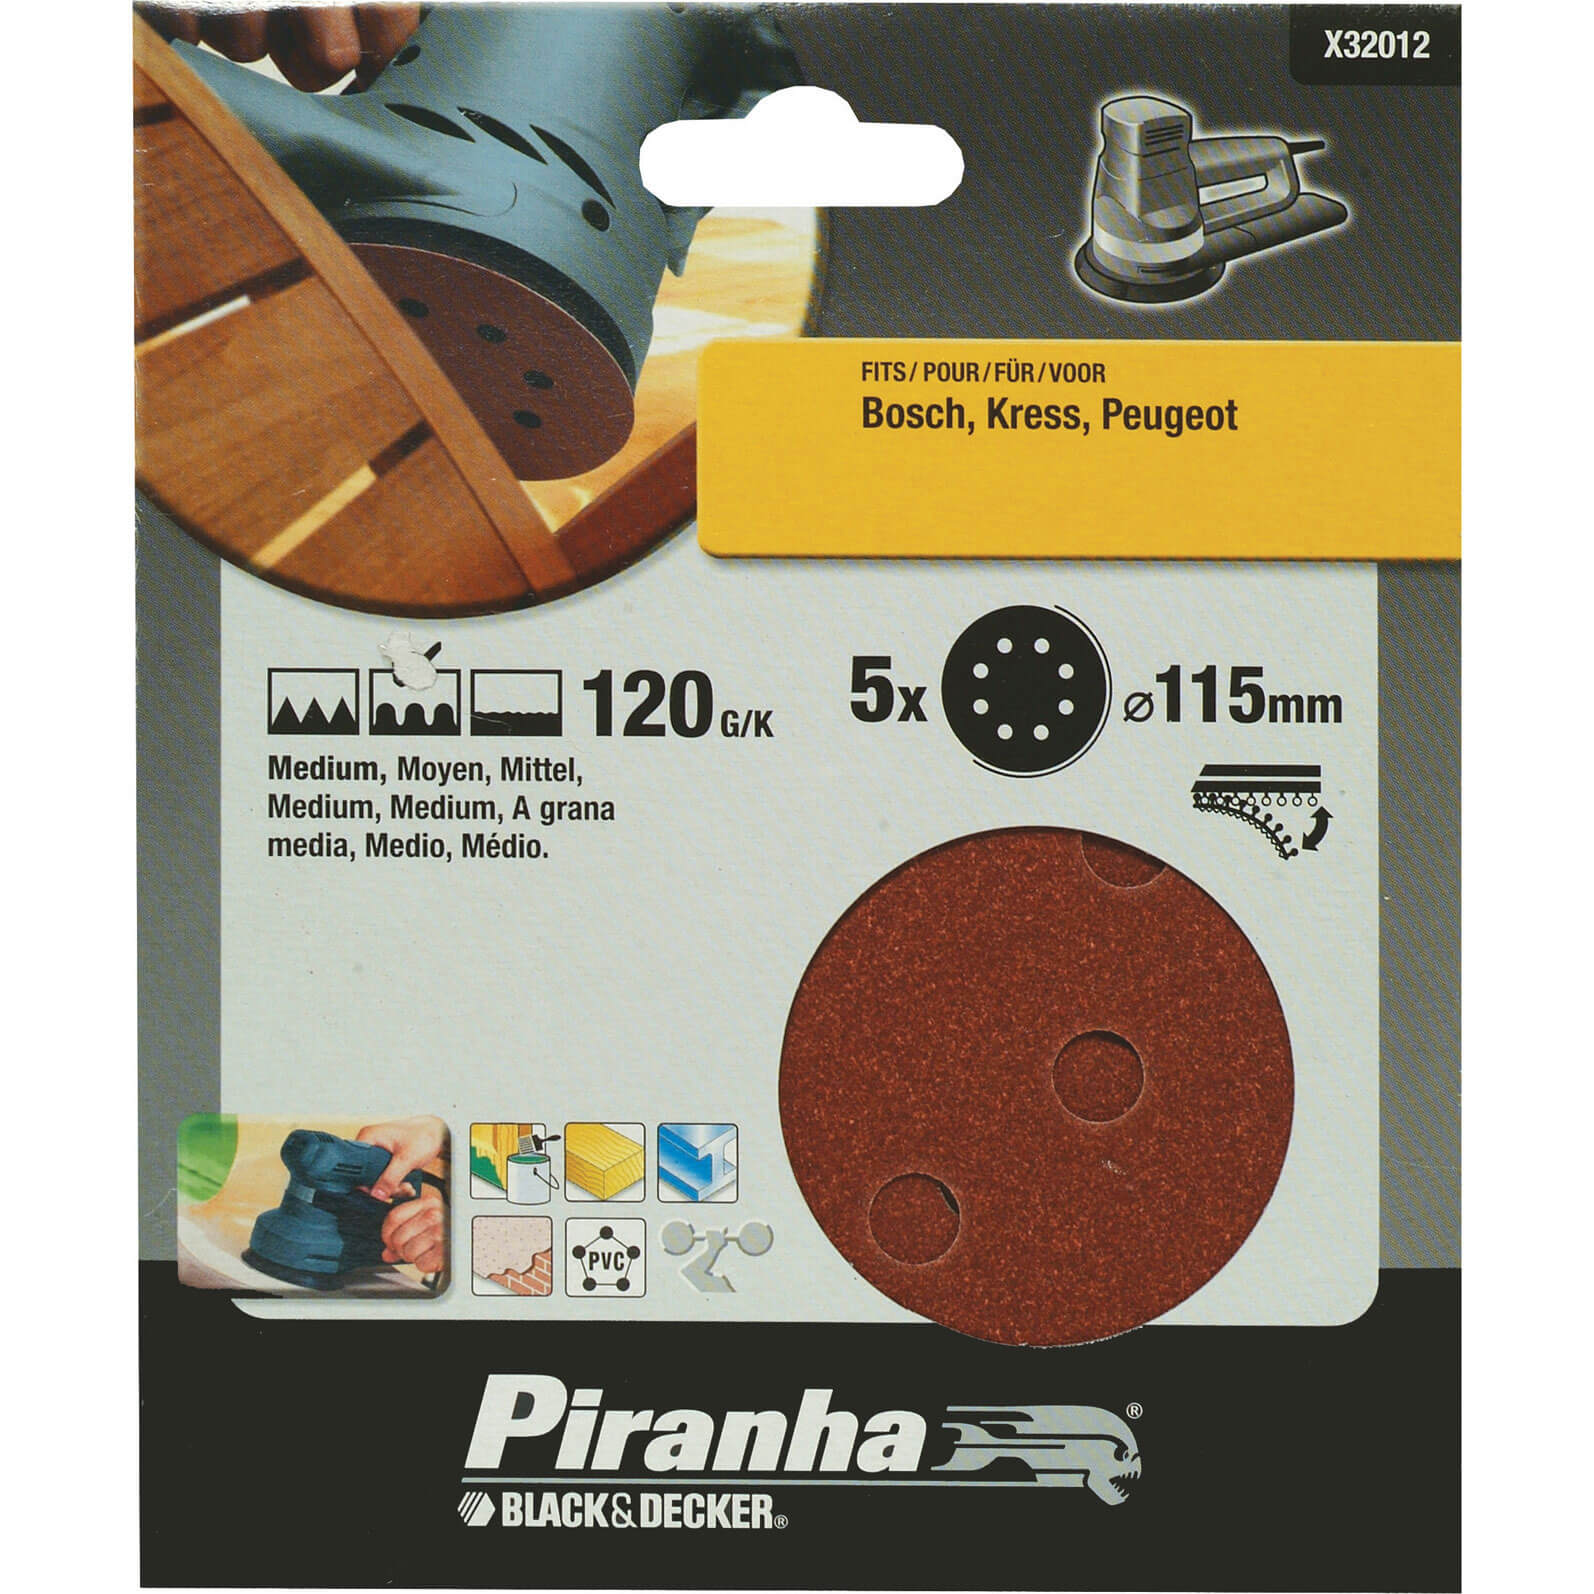 Image of Black and Decker Piranha Quick Fit ROS Sanding Discs 115mm 115mm 120g Pack of 5